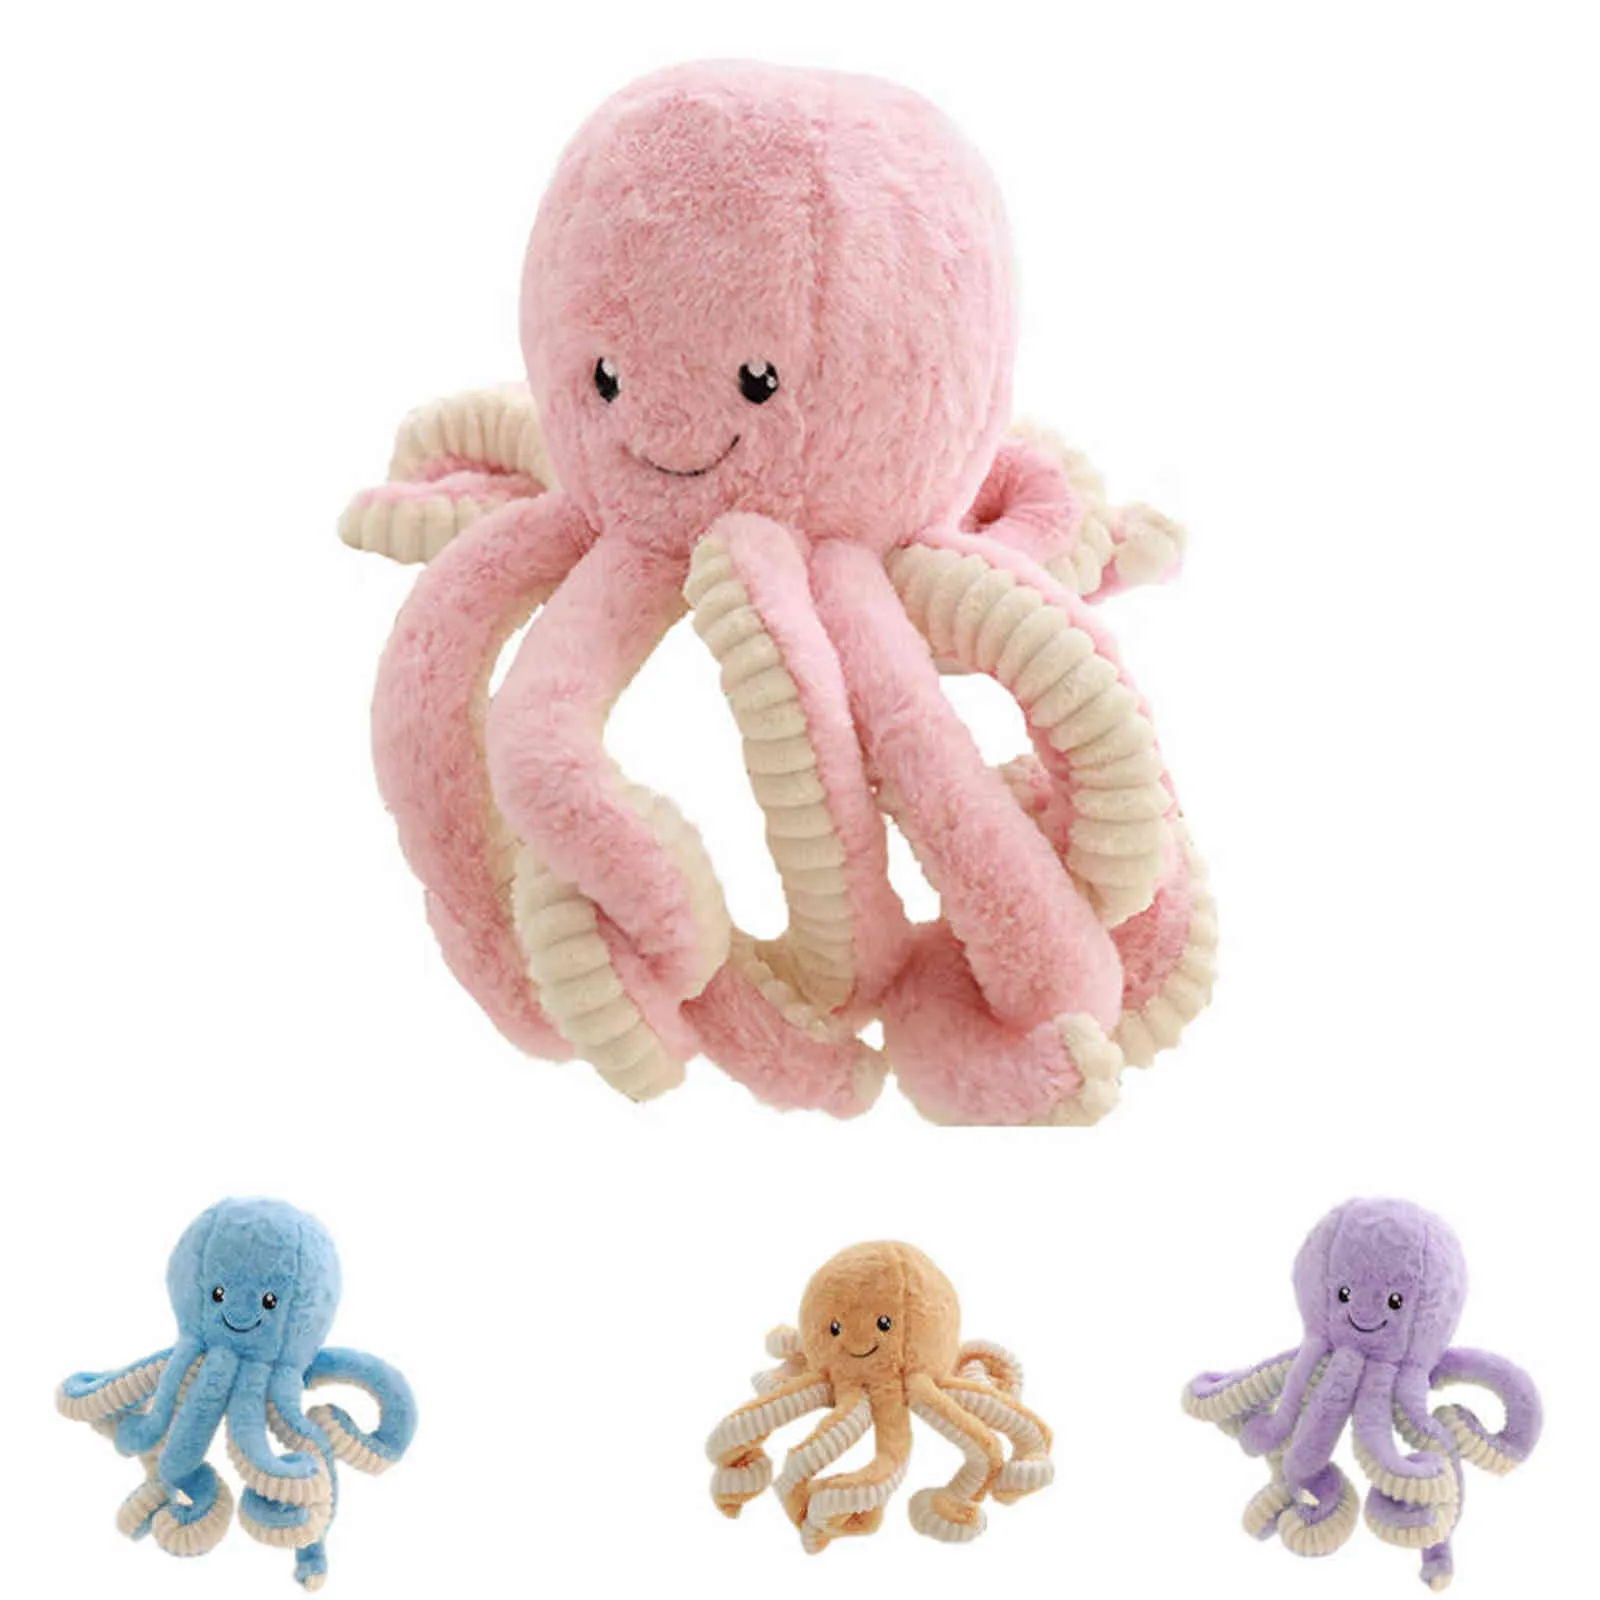 Customized Size Octopus Stuffed Plush Toys For Baby Kids Birthday Christmas Children Kid Gifts Cute Tako Dolls Y211119